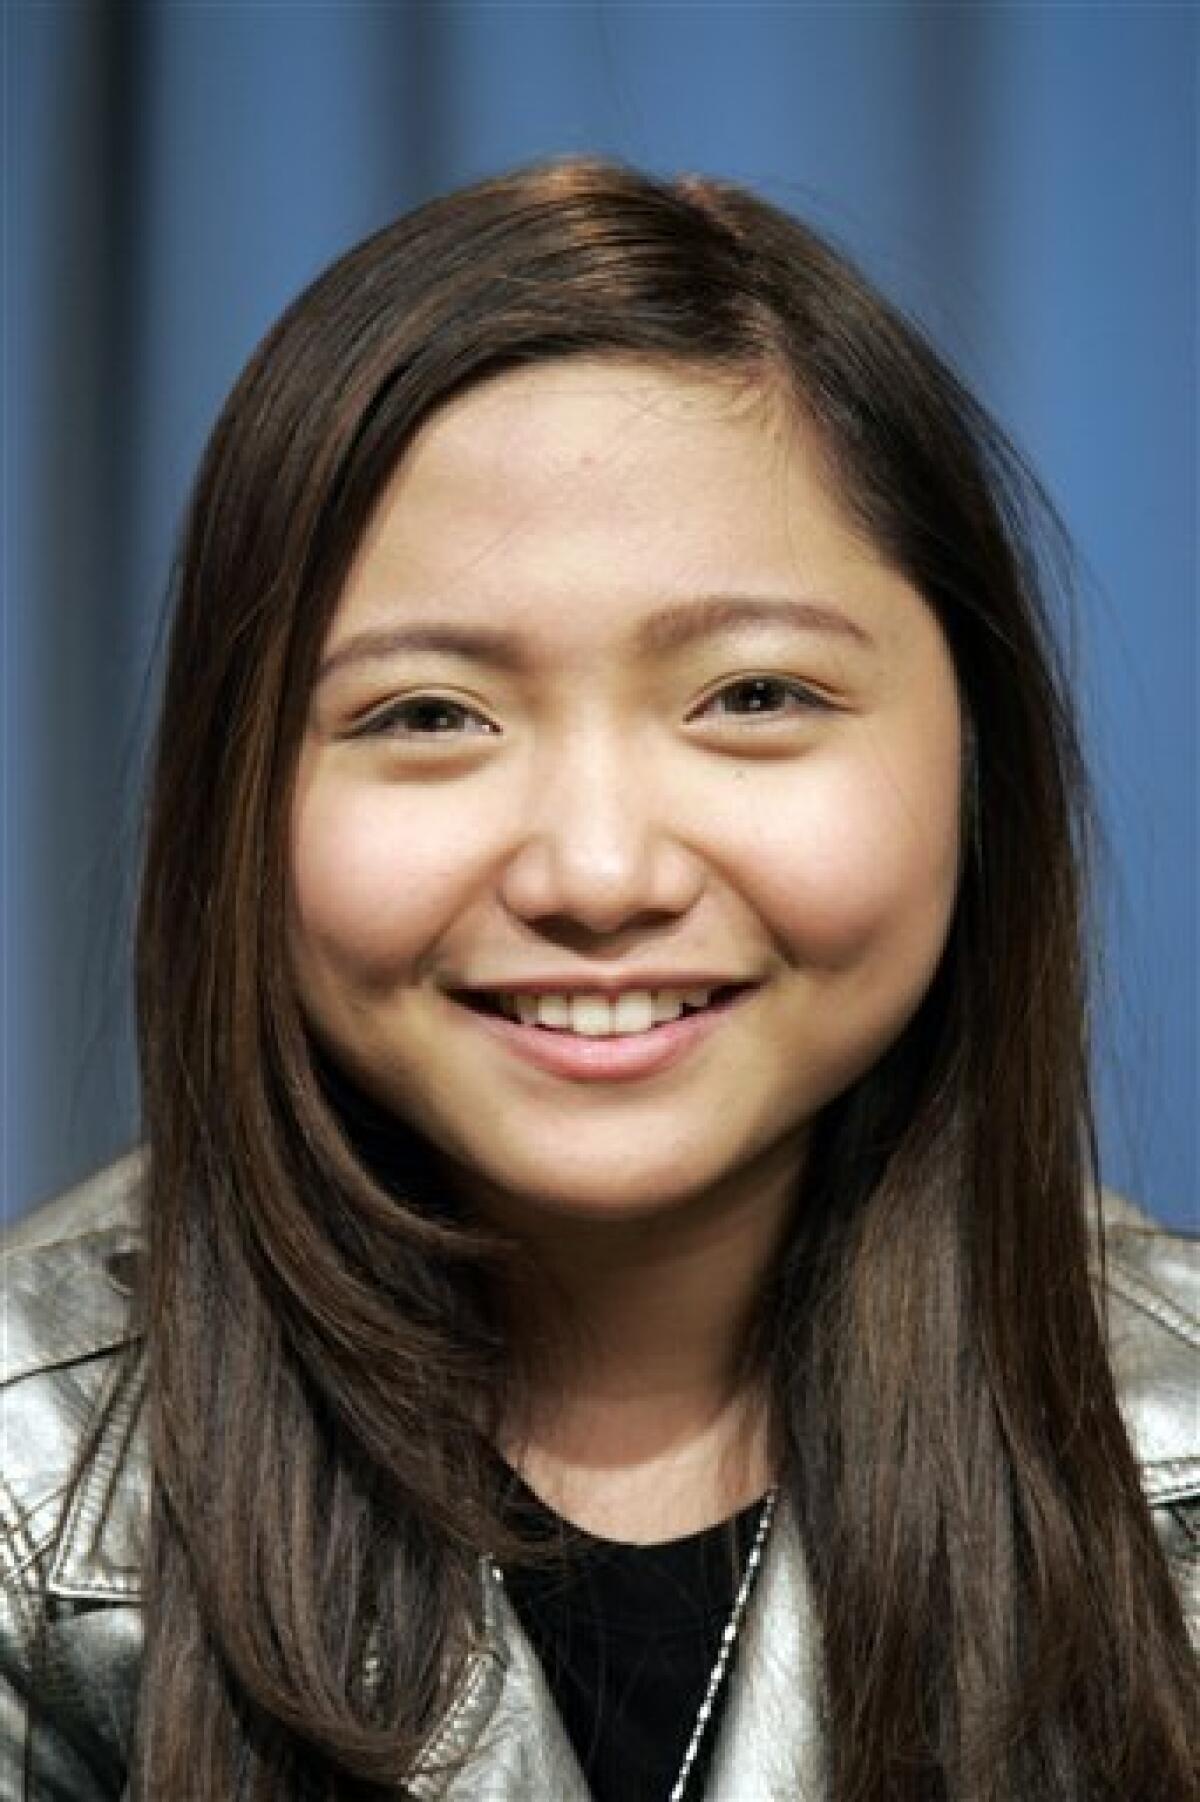 Recording artist Charice Pempengco poses for a portrait in New York, Thursday, April 15, 2010. Charice has had noninvasive cosmetic procedures in preparation for her debut in the second season of the hit TV show "Glee." (AP Photo/Jeff Christensen)